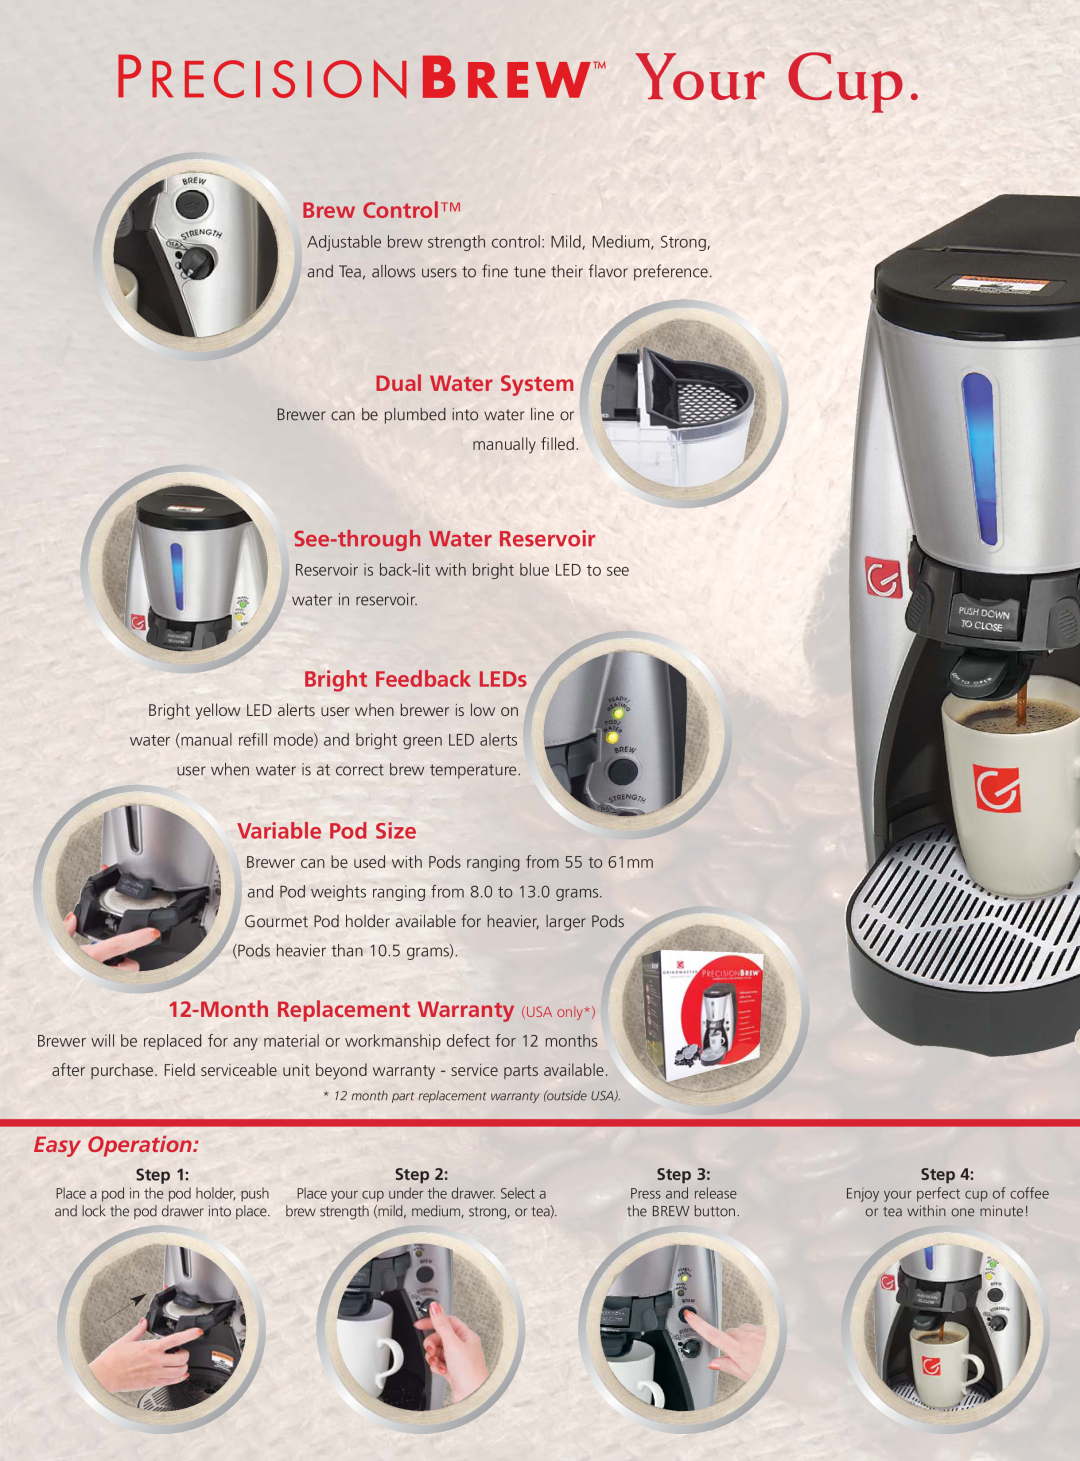 Grindmaster Single Cup Pod Brewer Your Cup, Brew Control, Dual Water System, See-through Water Reservoir, Easy Operation 